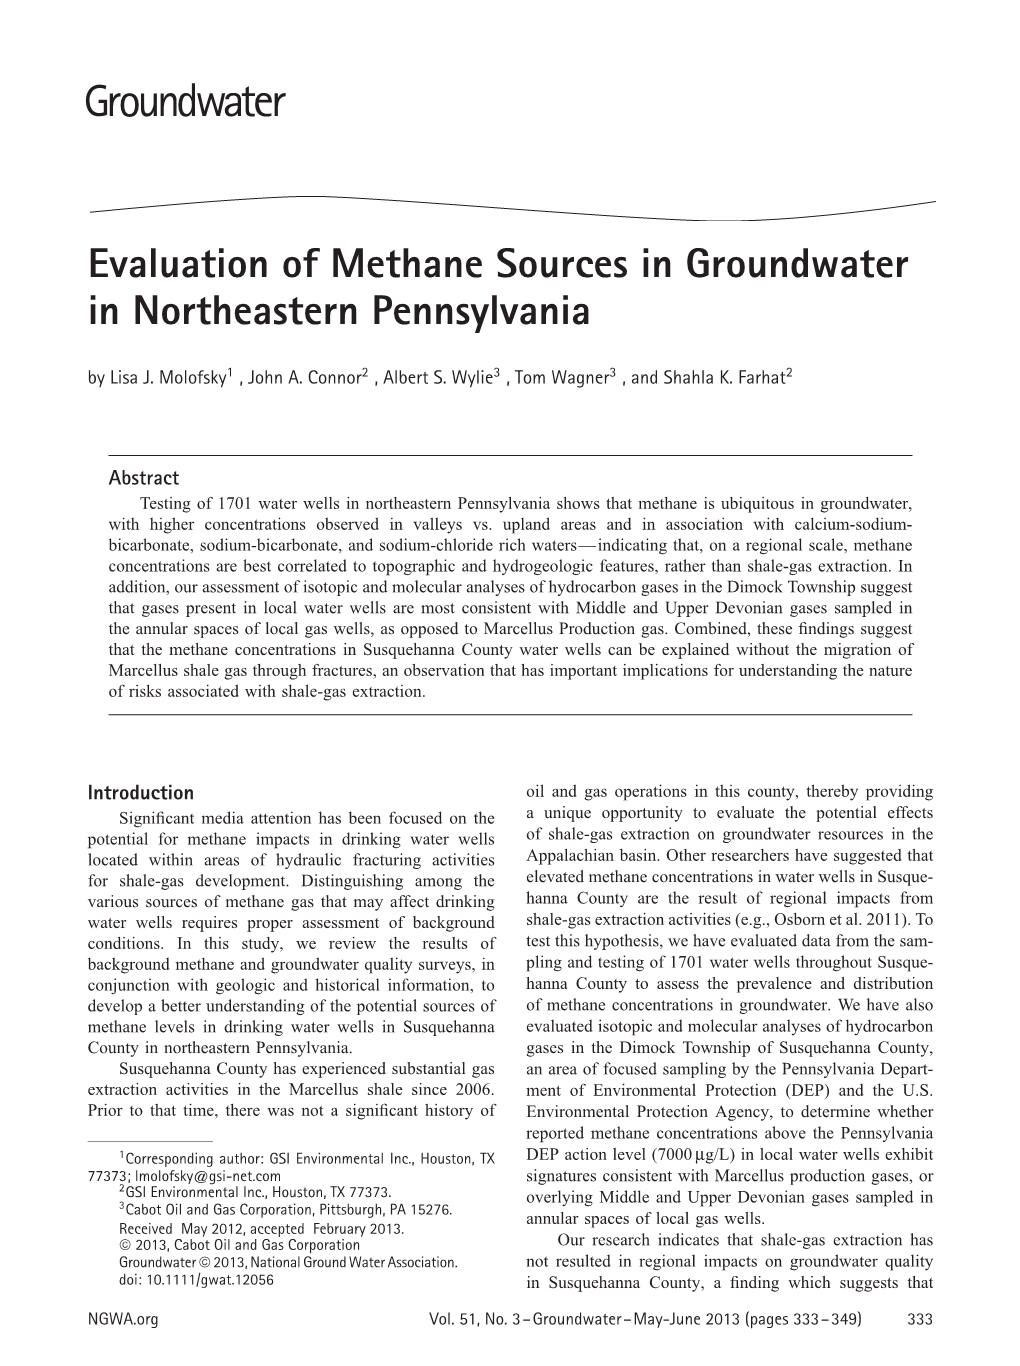 Evaluation of Methane Sources in Groundwater in Northeastern Pennsylvania by Lisa J